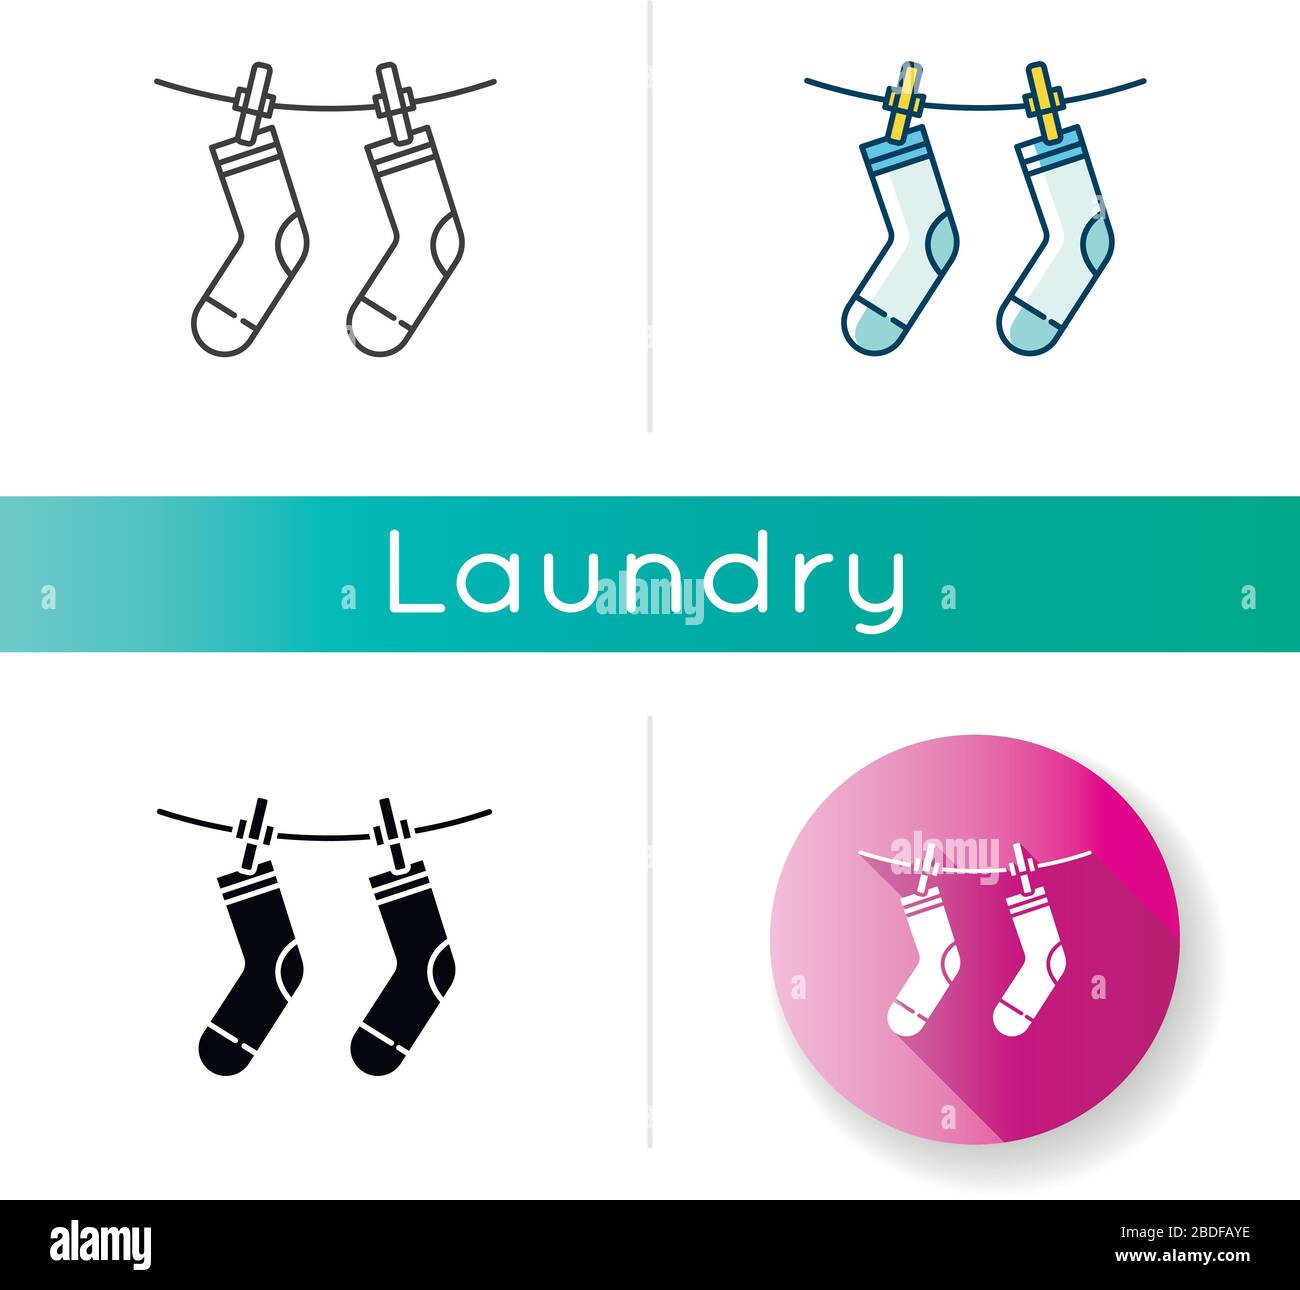 Outside drying icon. Laundry, clothesline, outdoors clothes drying. Socks hanging on clothesline, clean clothing, washed garment. Linear black and RGB Stock Vector